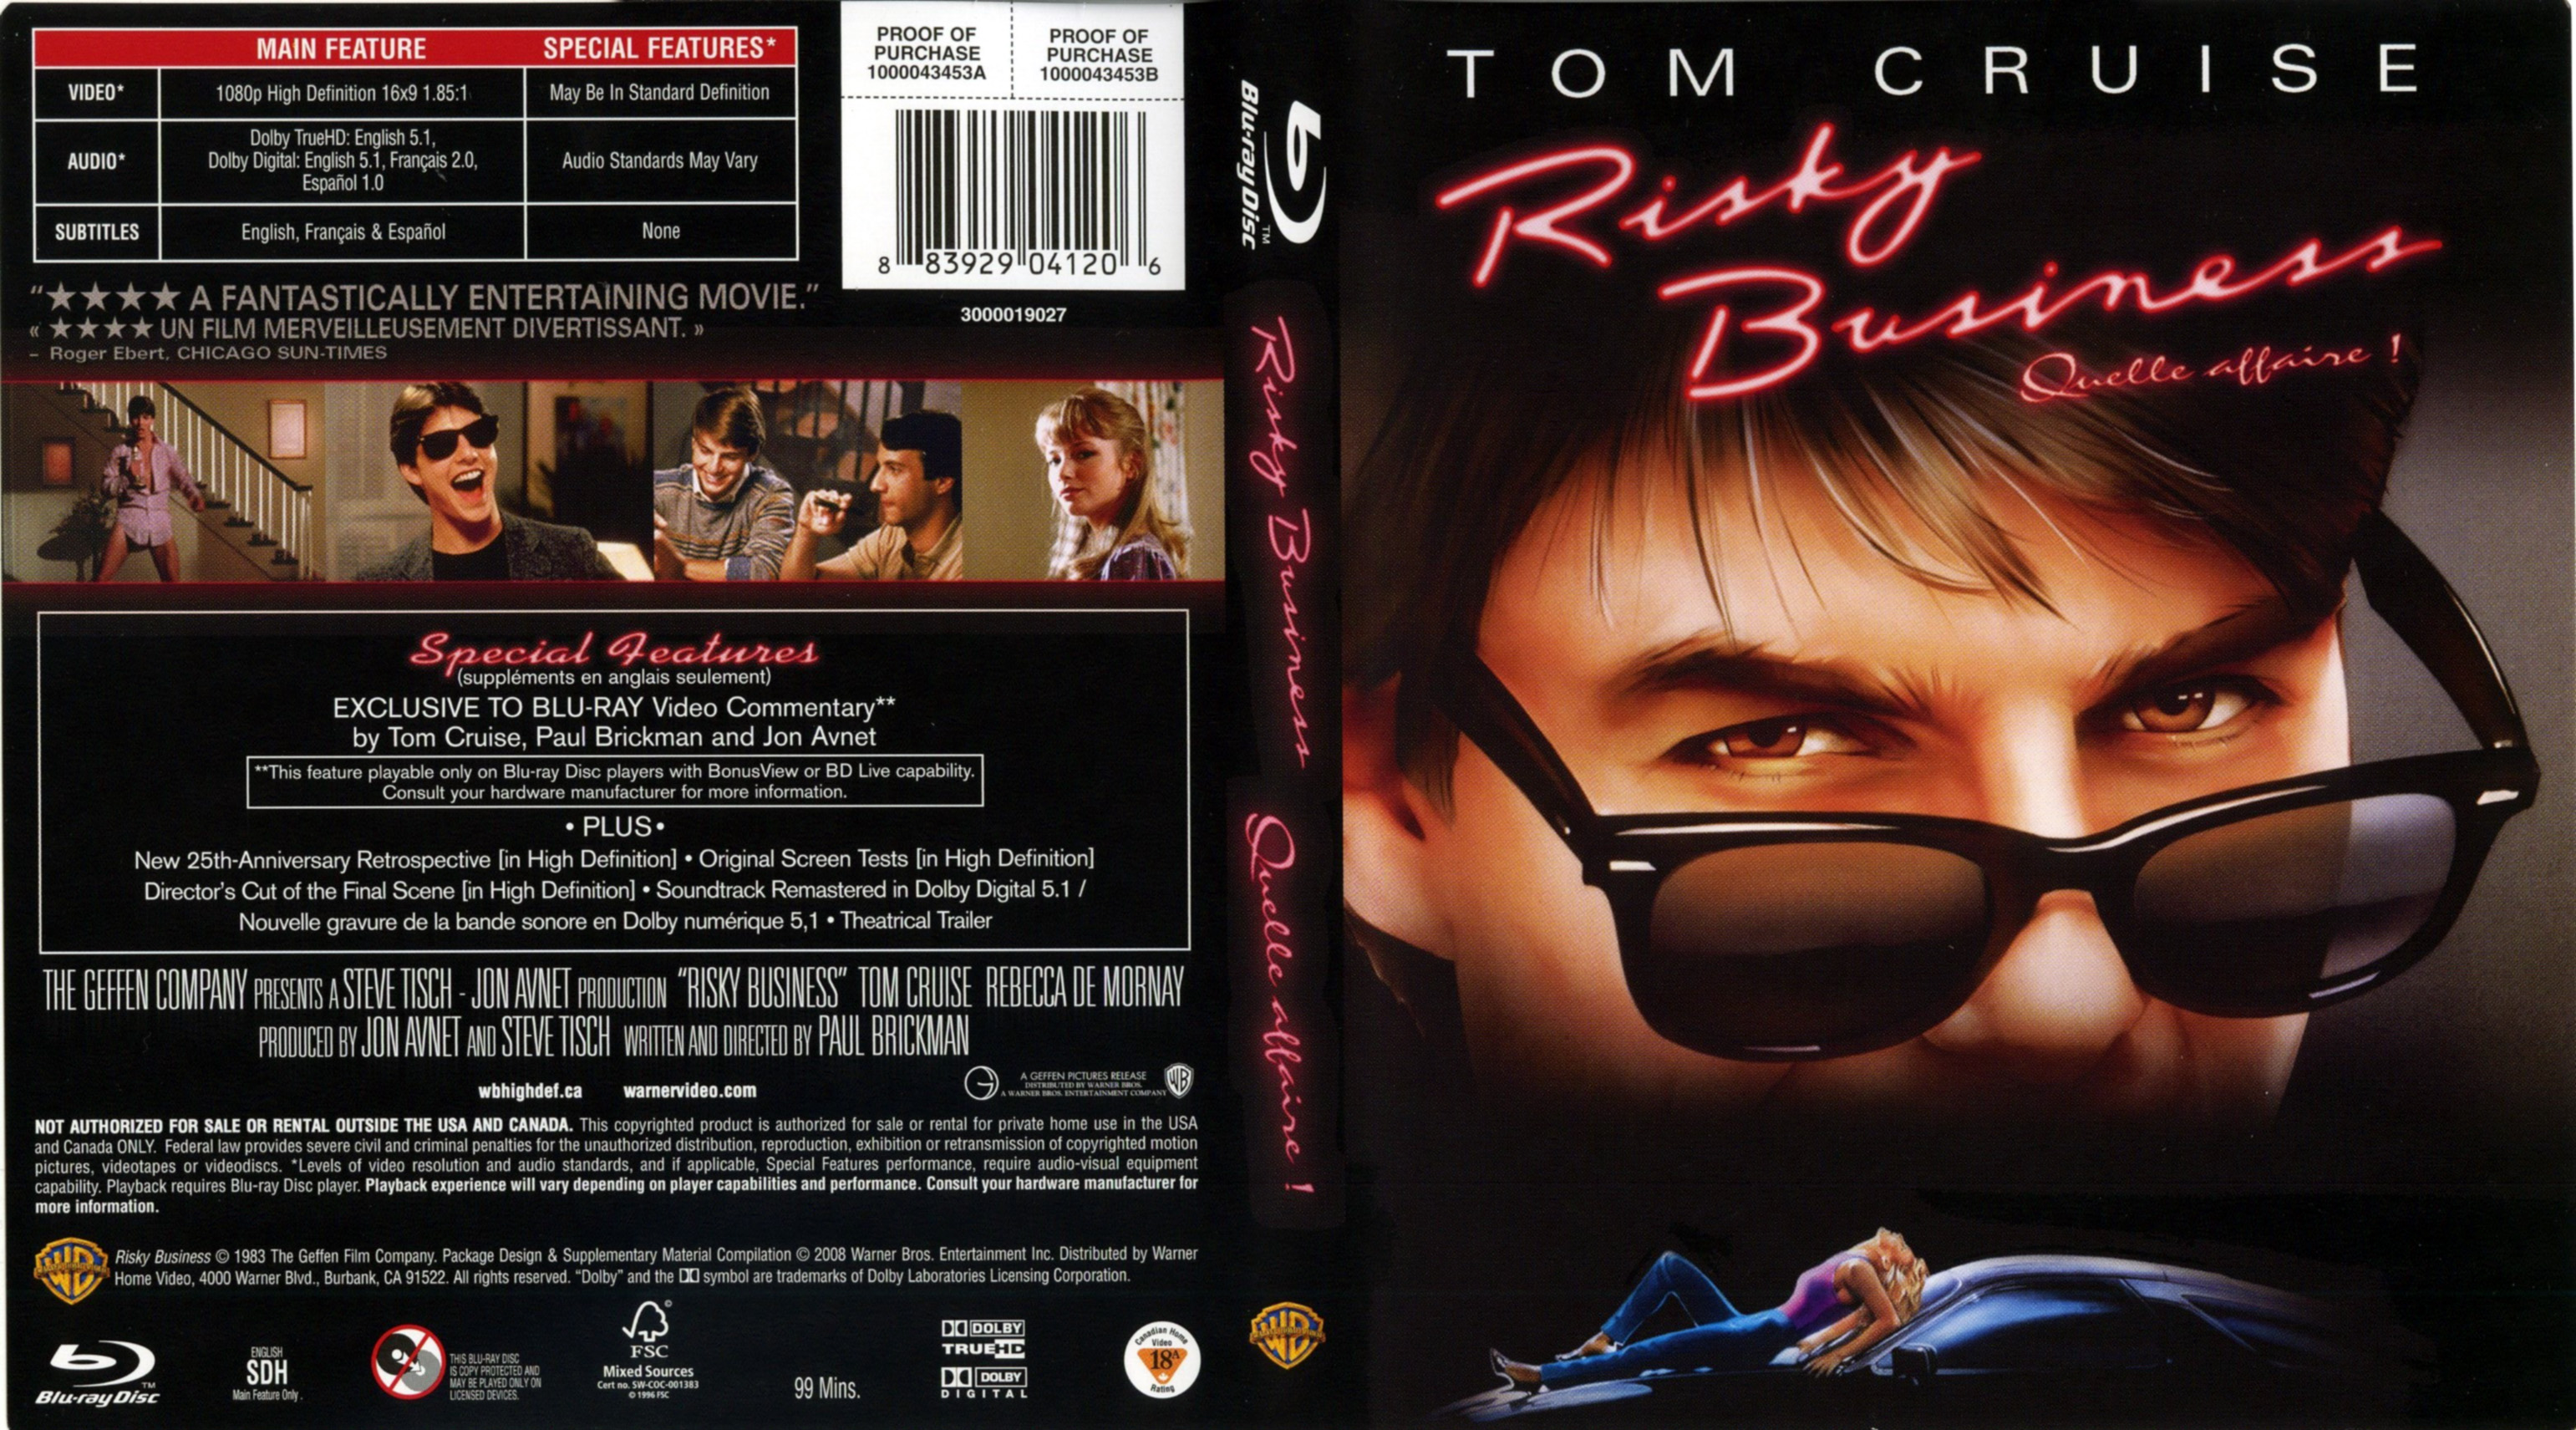 Jaquette DVD Risky business (Canadienne) (BLU-RAY)